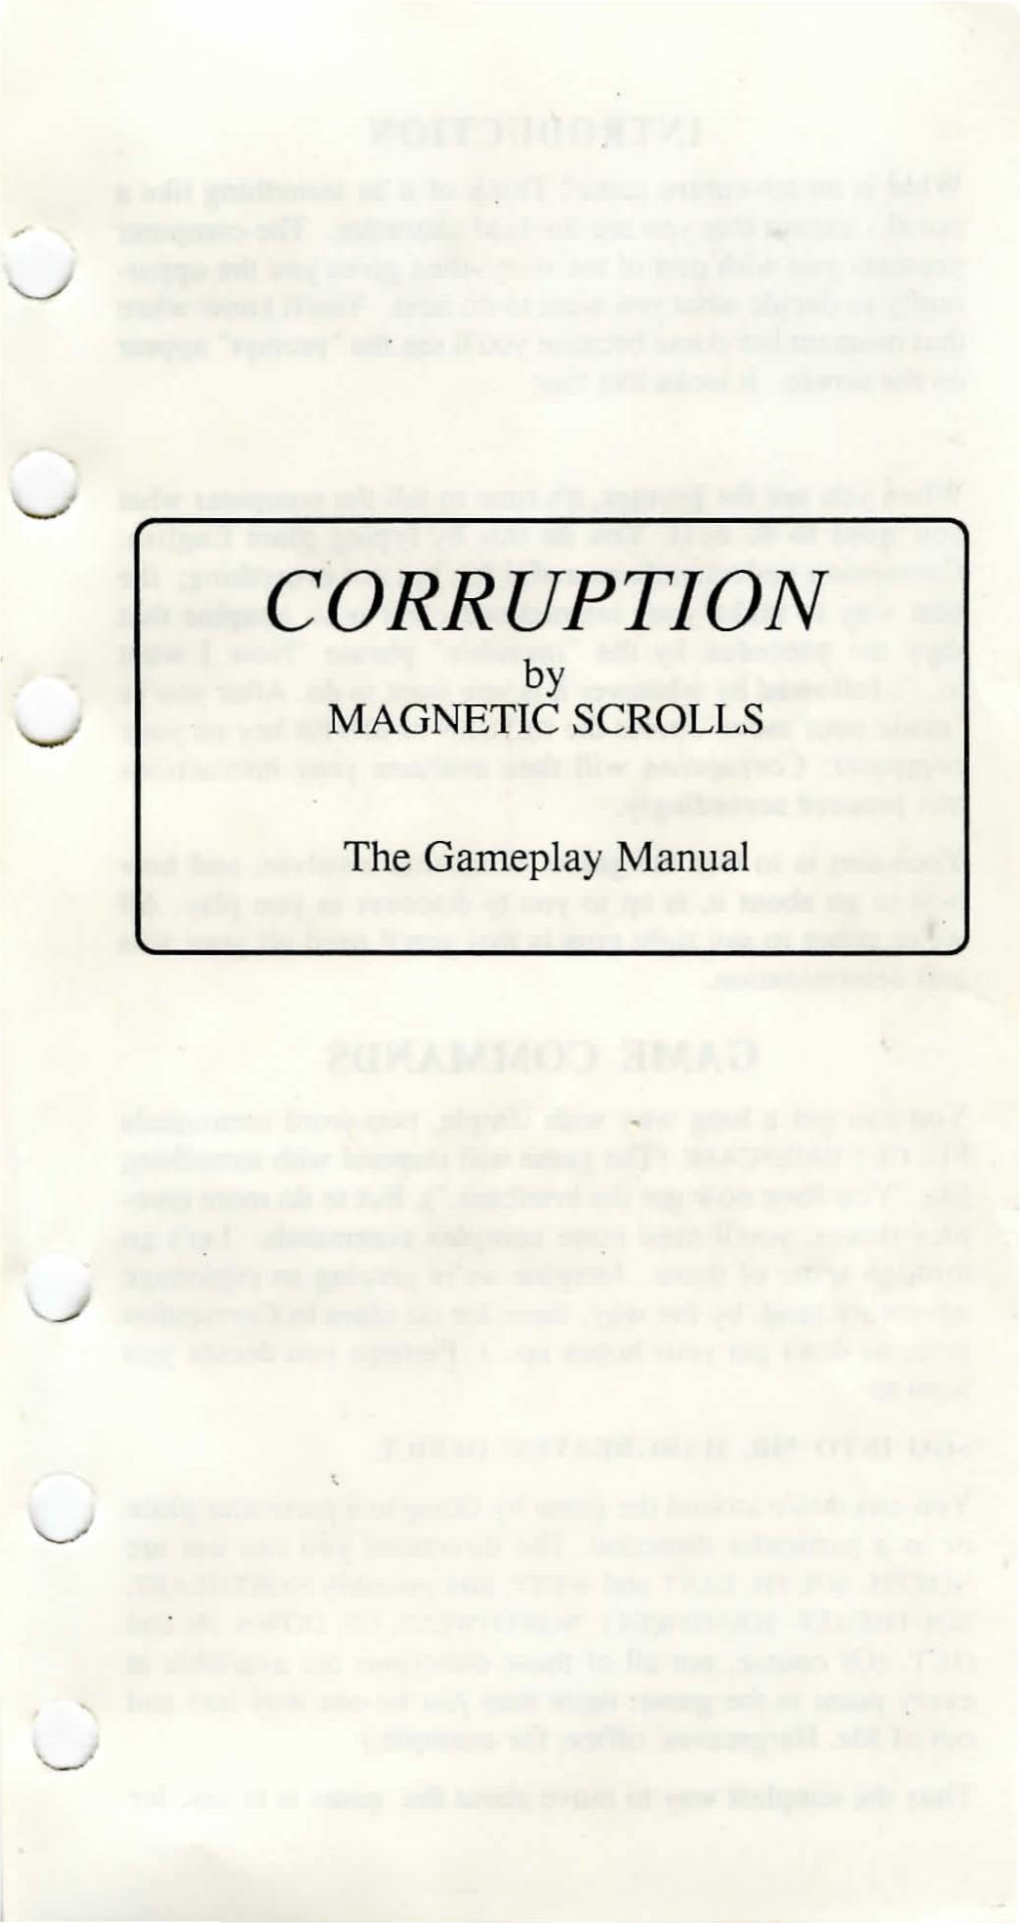 CORRUPTION by MAGNETIC SCROLLS